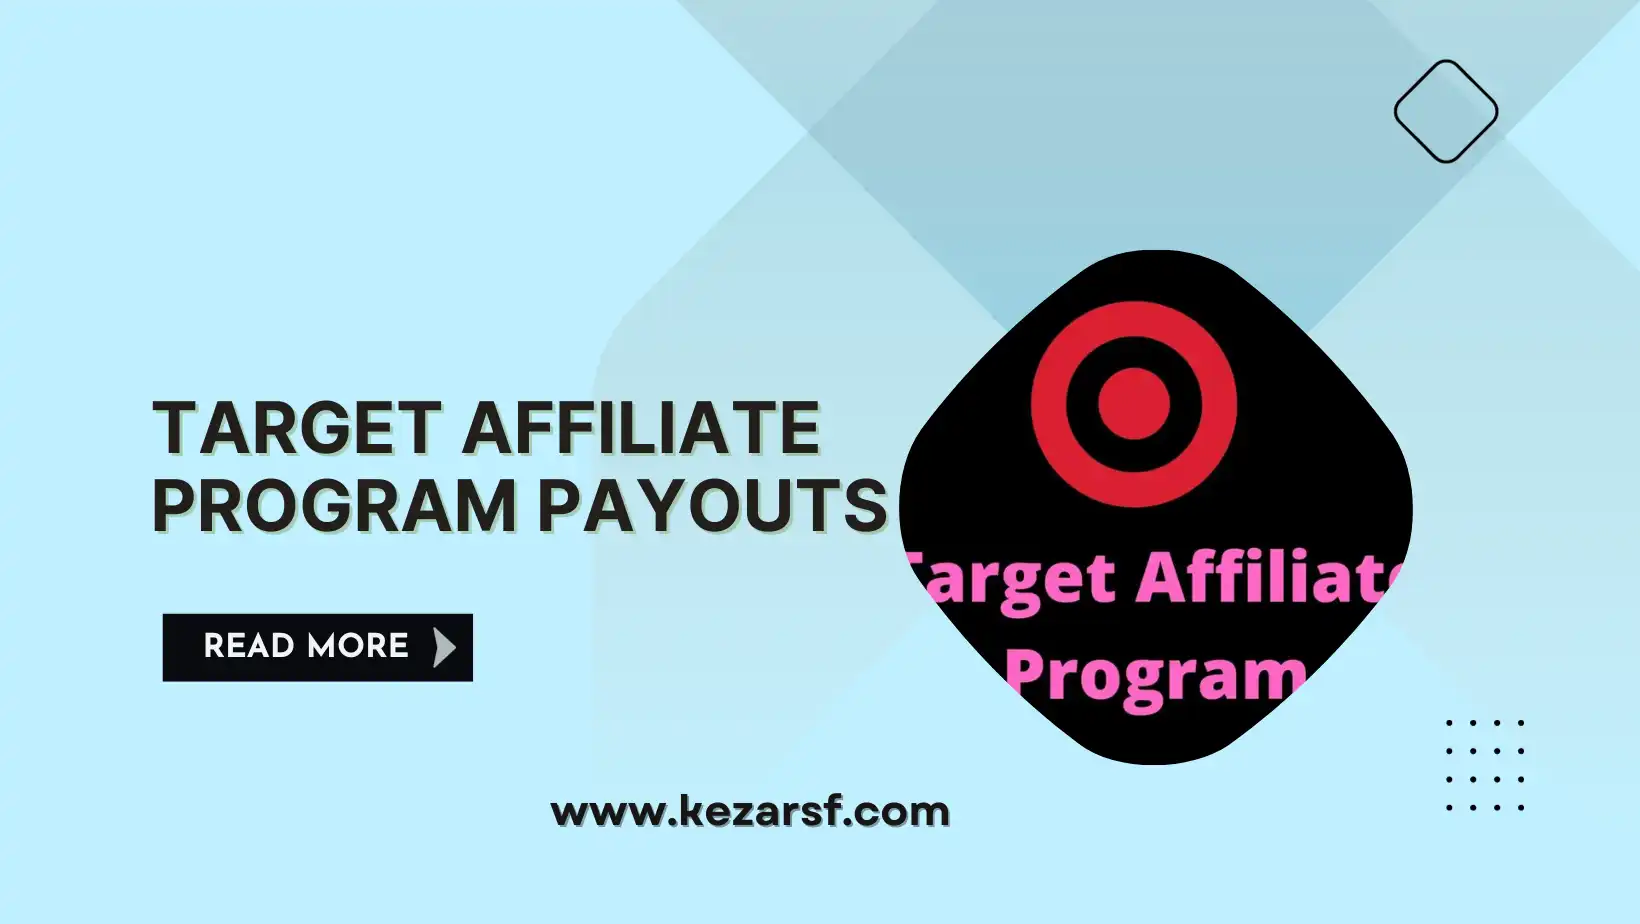 Target Affiliate Program Payouts: What Can You Expect Earning?